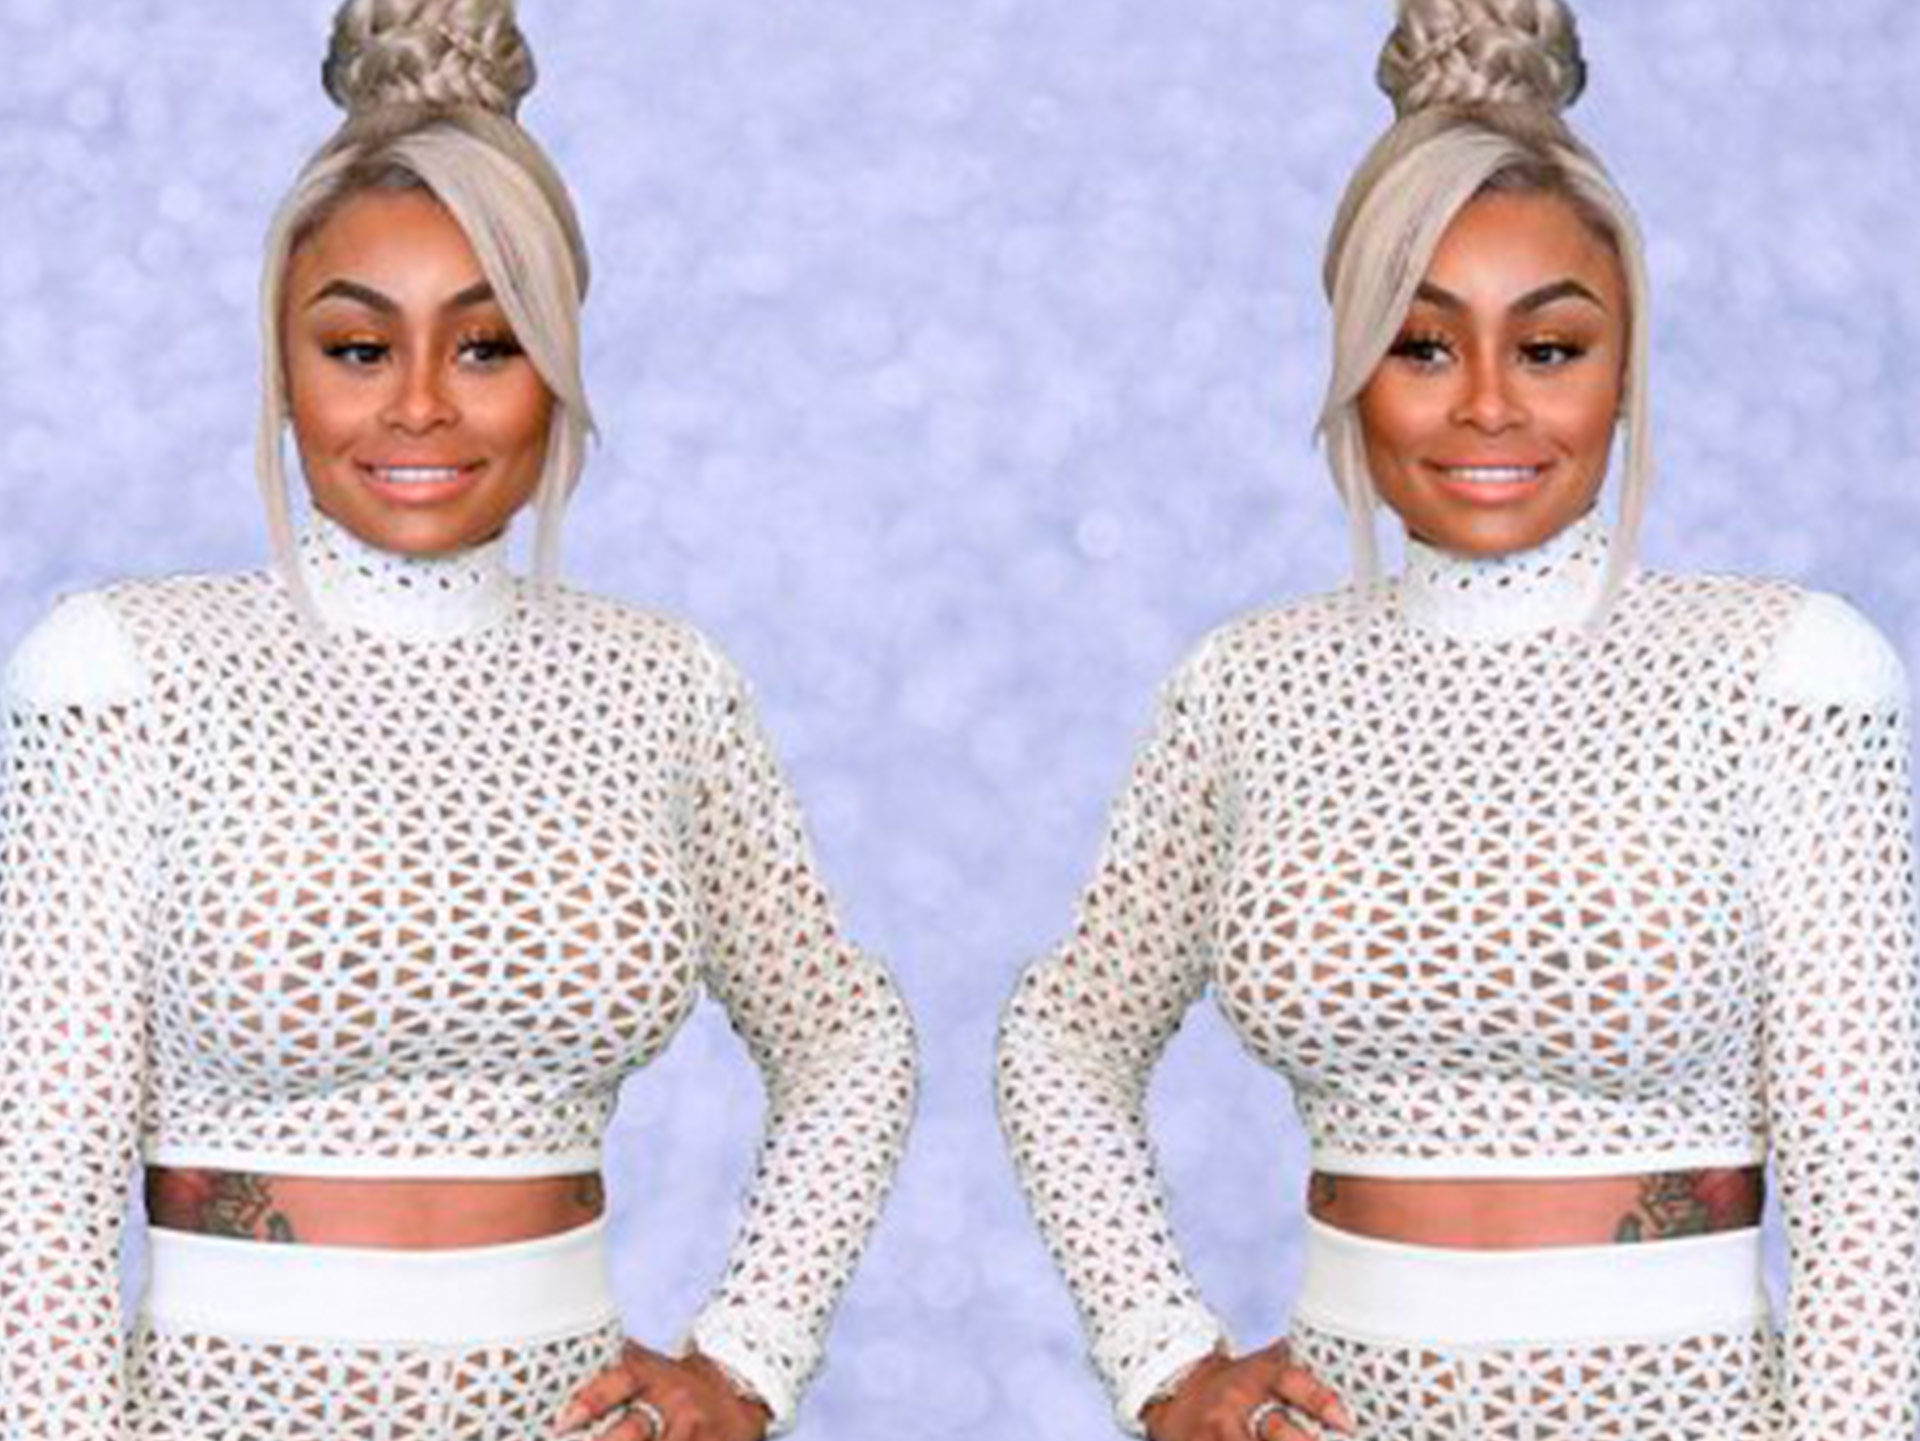 Blac Chyna is suing the entire Kardashian Family